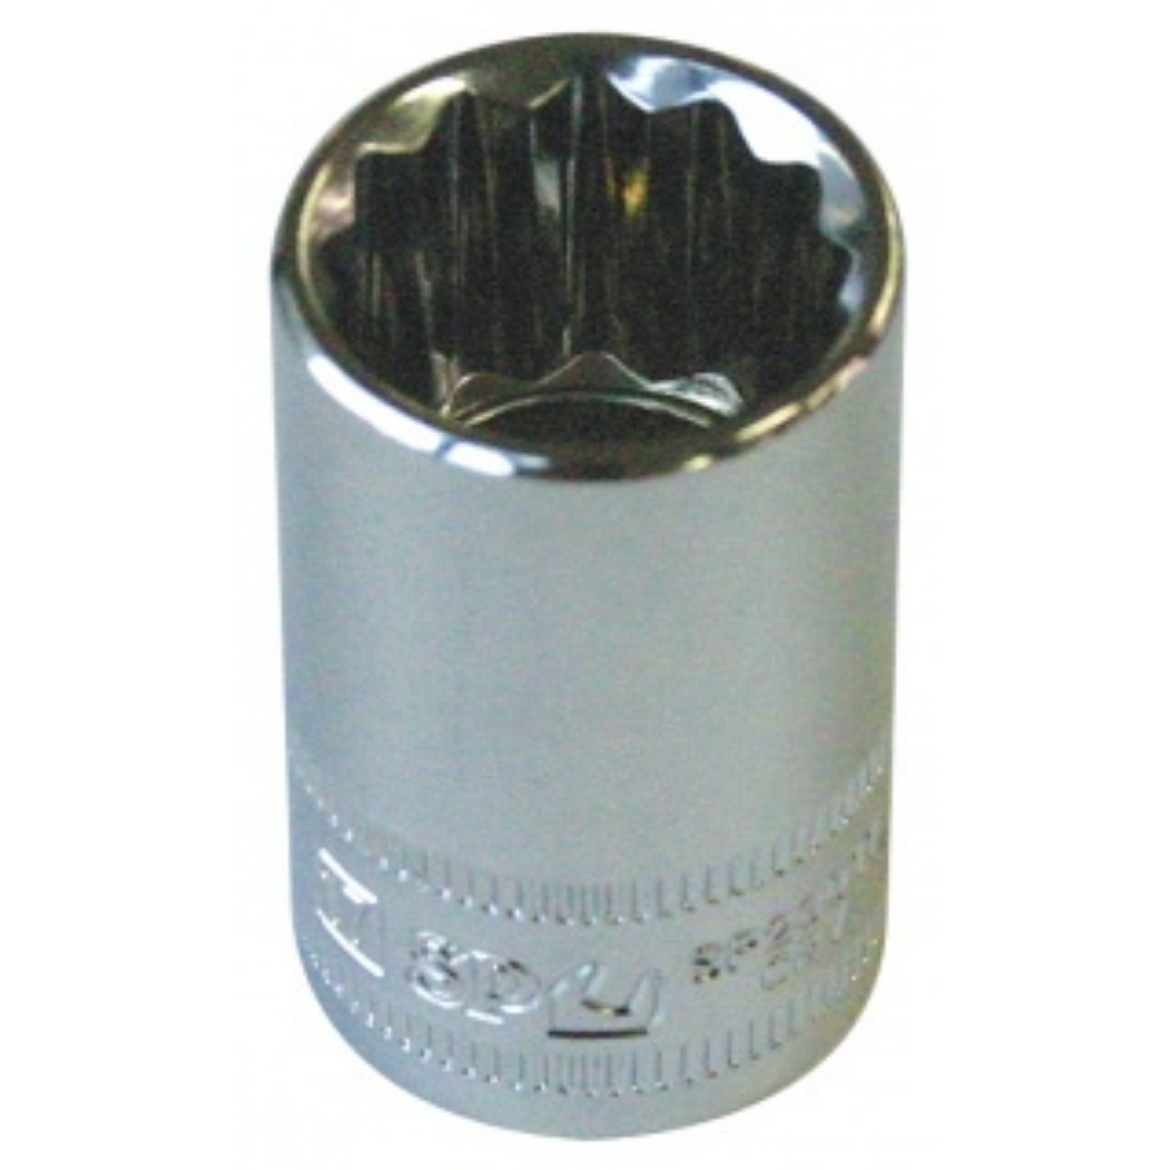 Picture of SOCKET 1/2"DR 12PT METRIC 17MM SP TOOLS